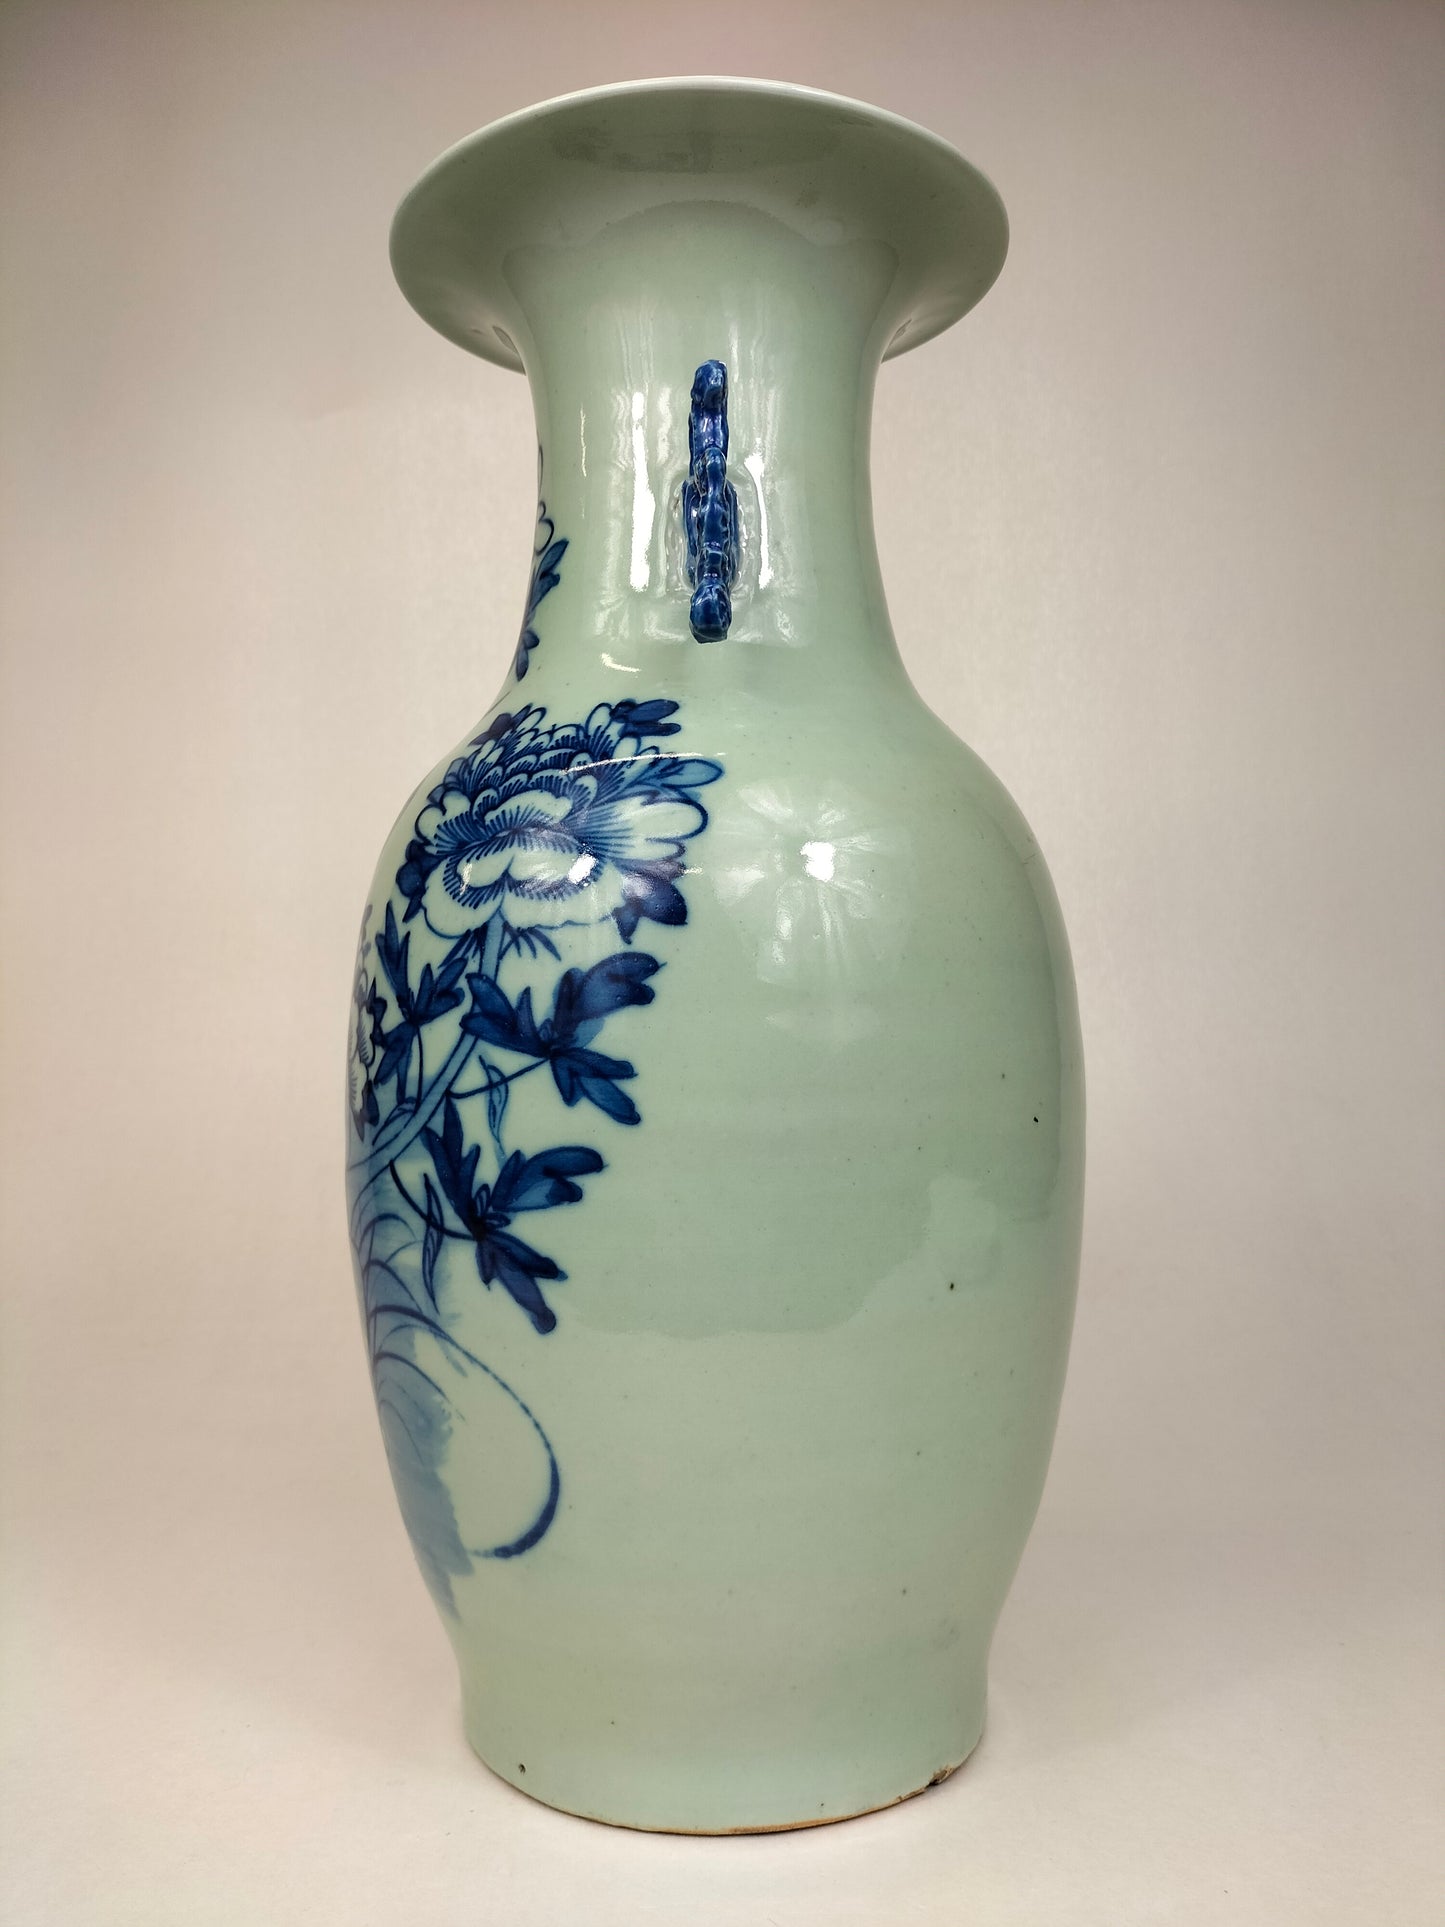 Antique Chinese vase decorated with bird and flowers // Qing Dynasty - 19th century